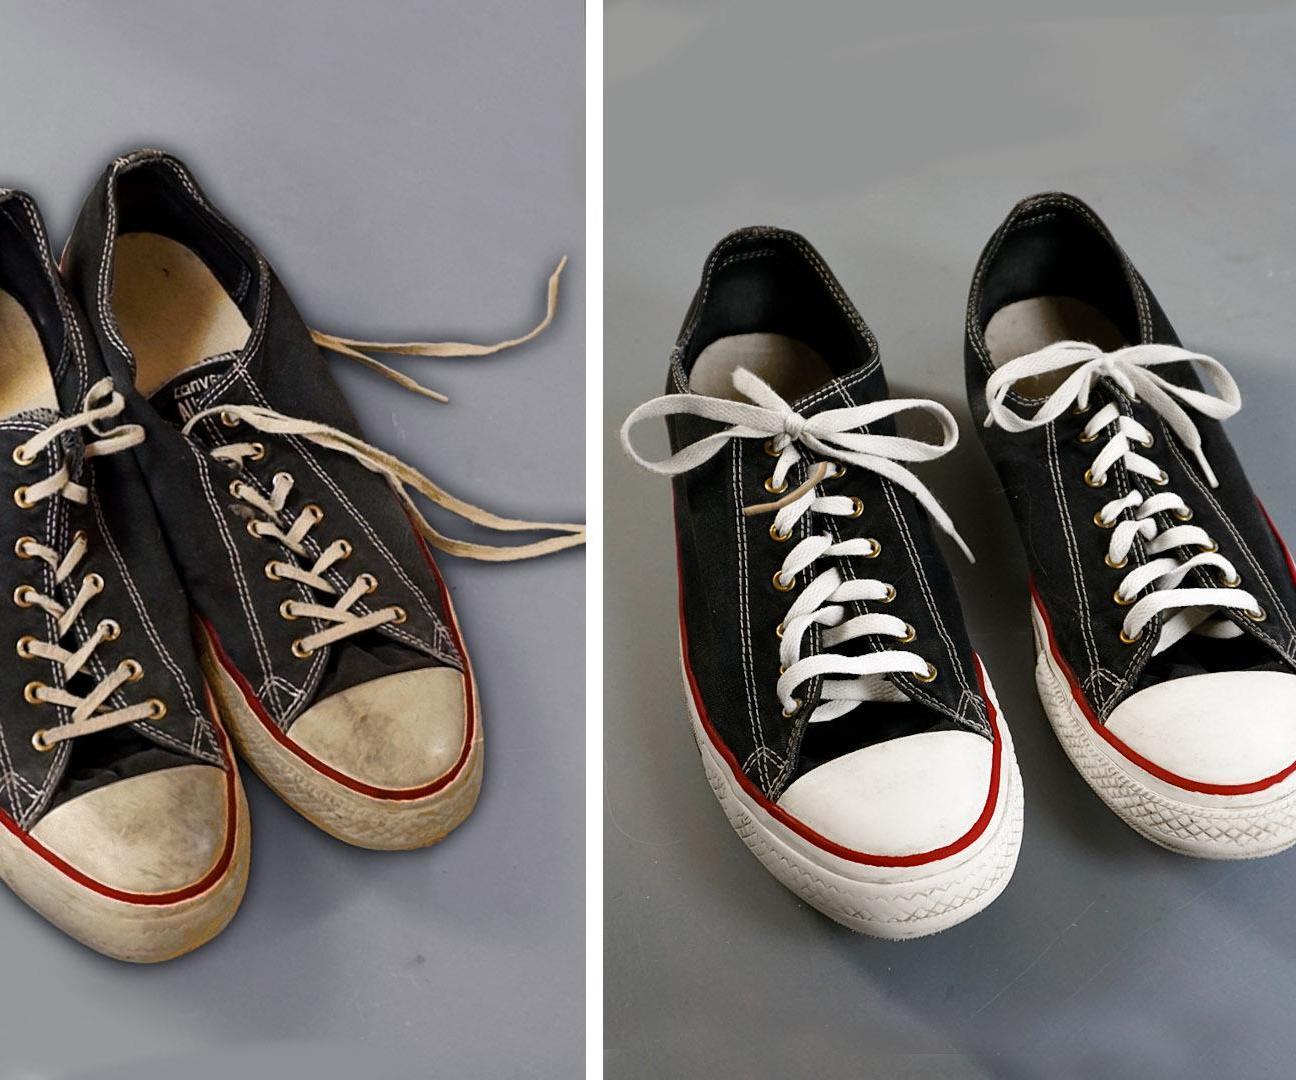 How to Clean and Restore Converse Shoes